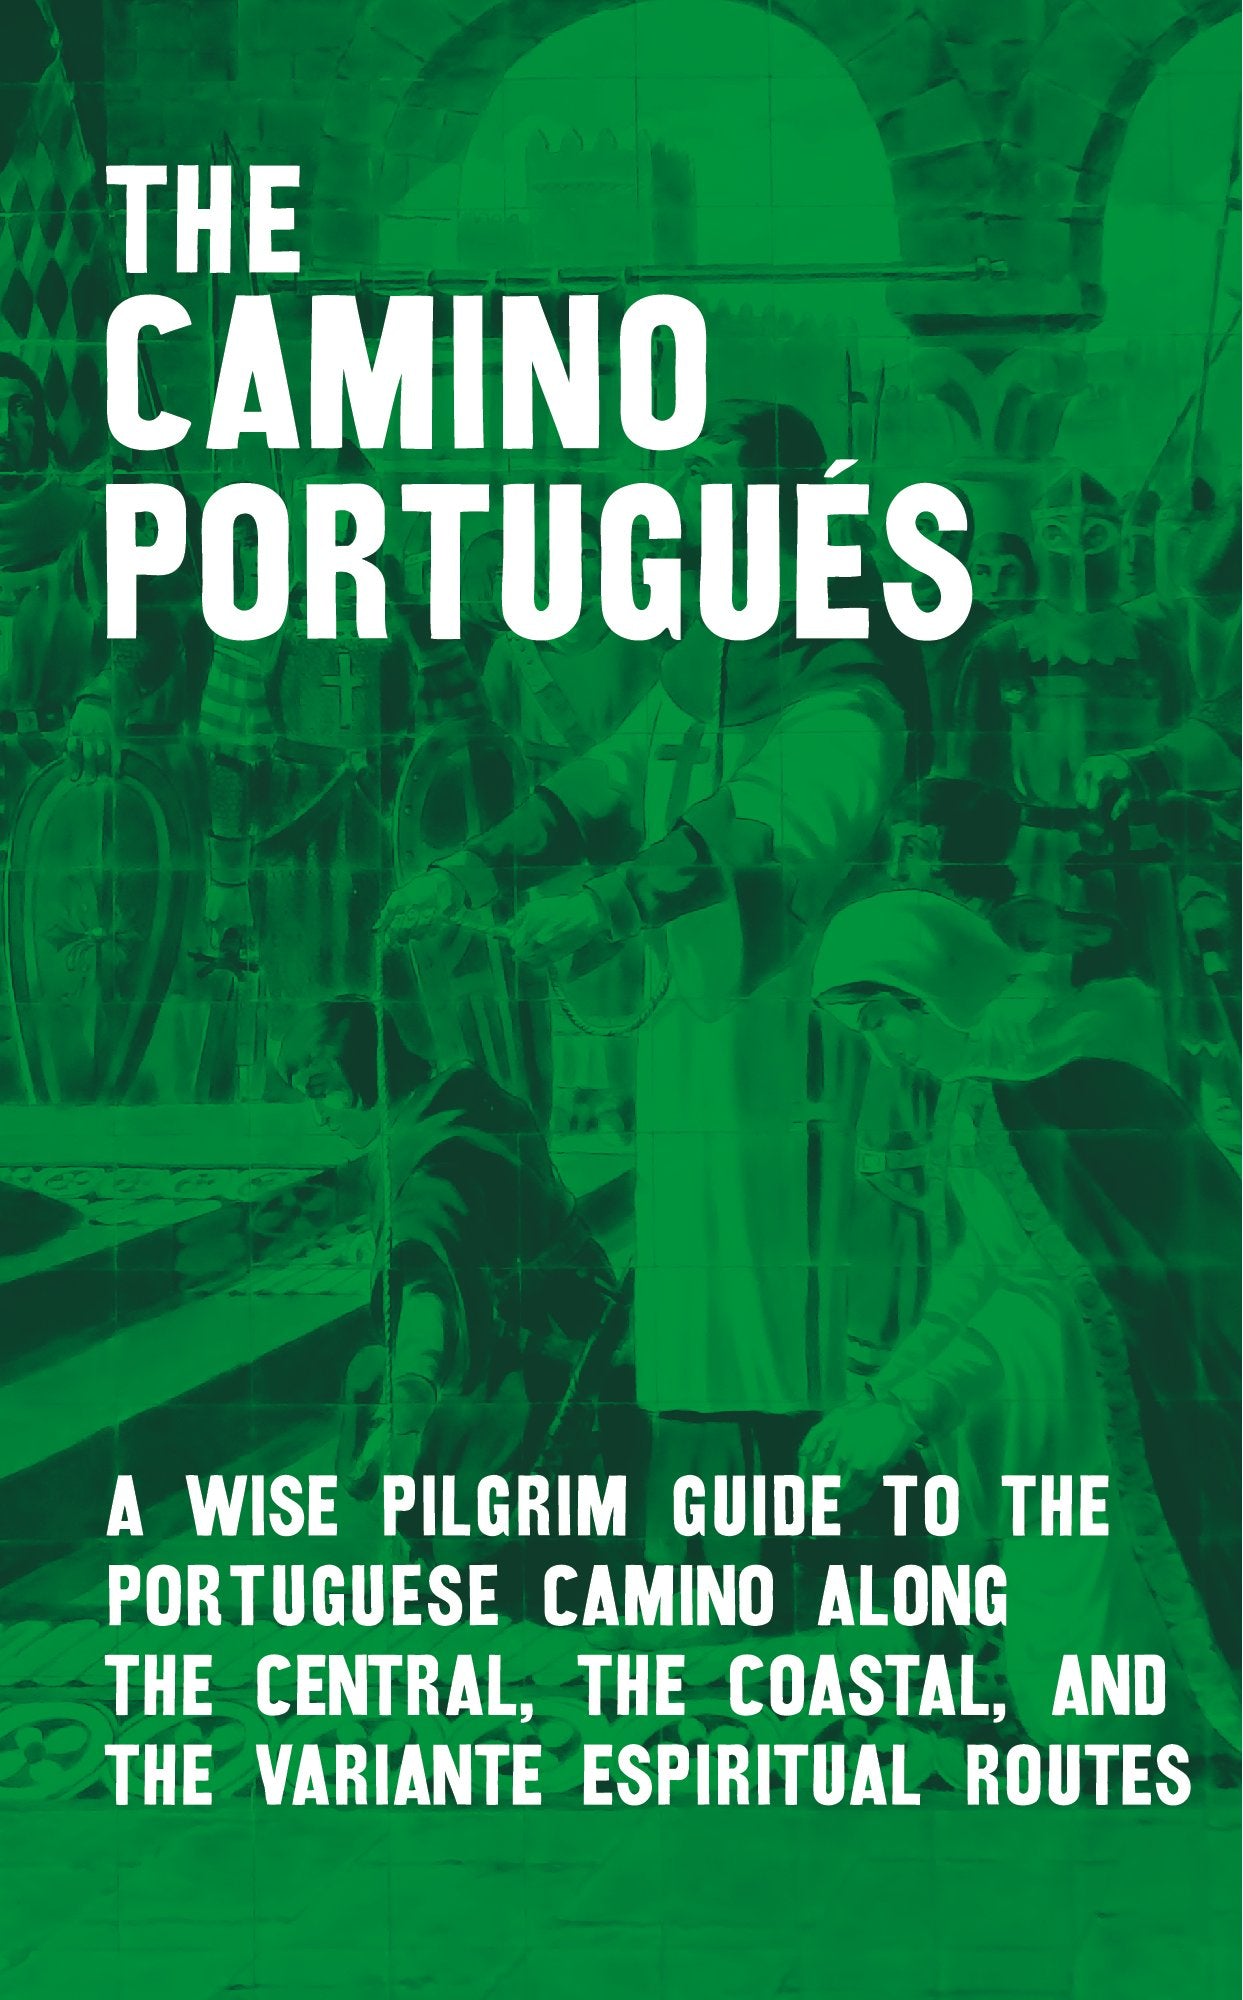 2024 edition: A Camino Portugués Guide (W/FREE Passport) (Order now, shipping late November).